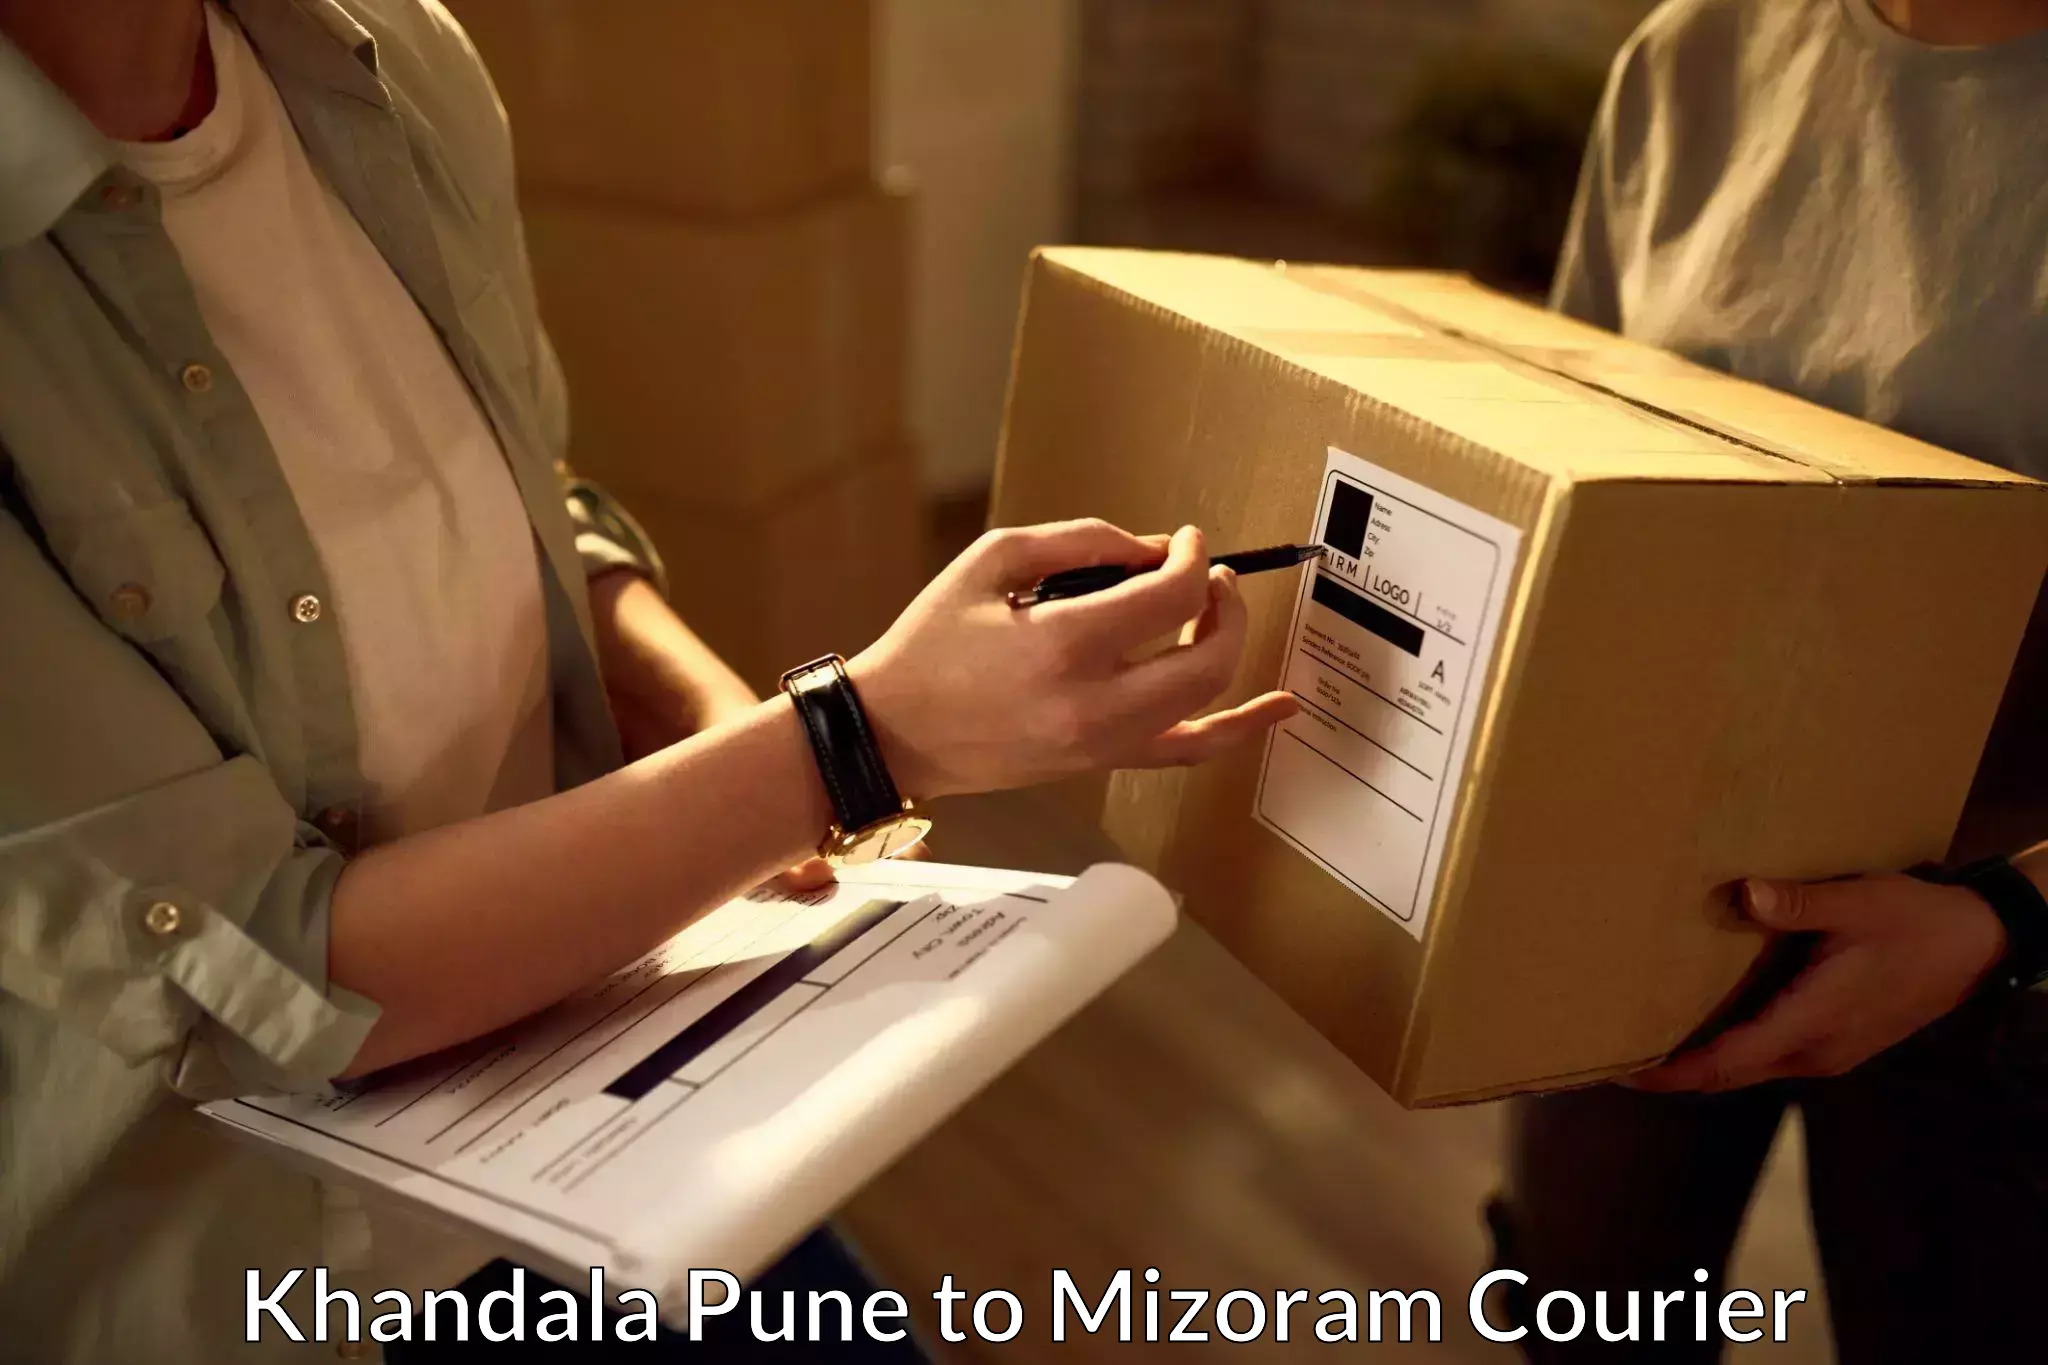 Reliable courier service in Khandala Pune to Lawngtlai